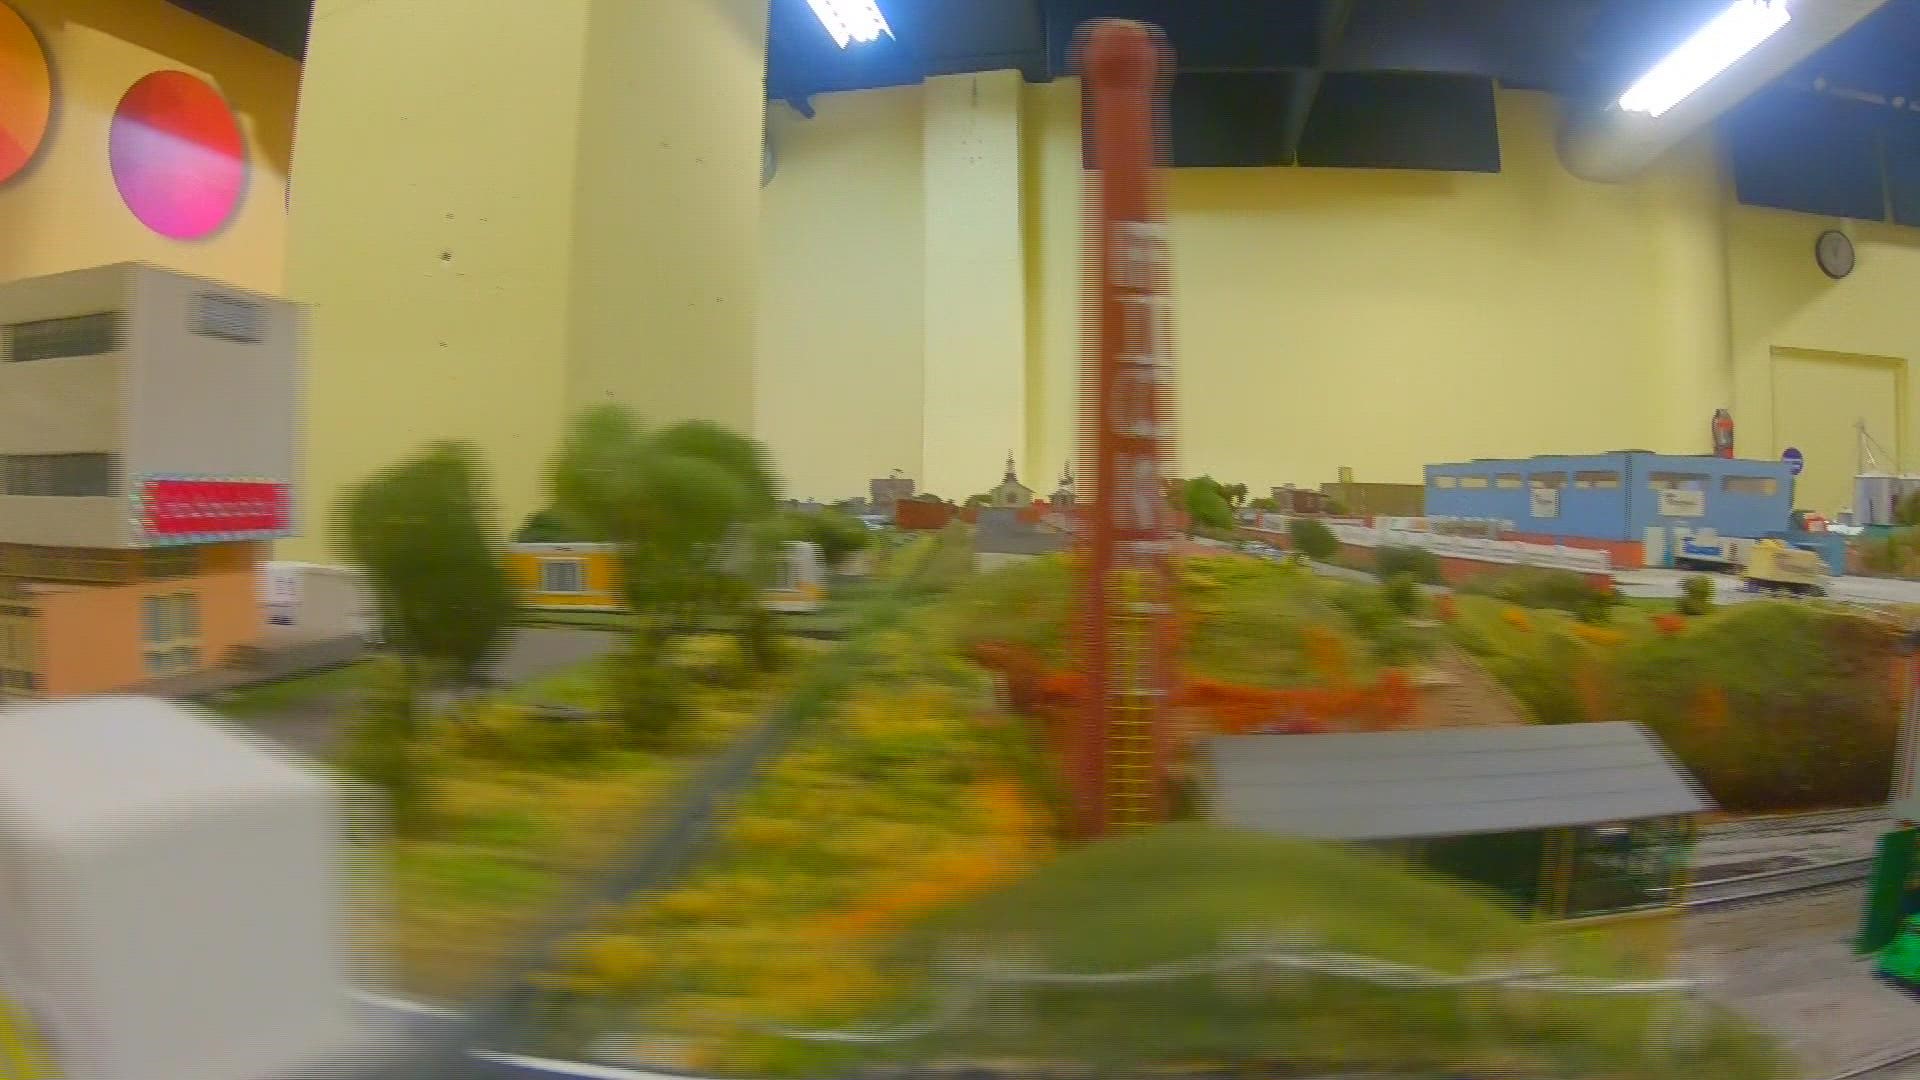 There were traditional model trains and Lego trains at the Imagination Station all week.